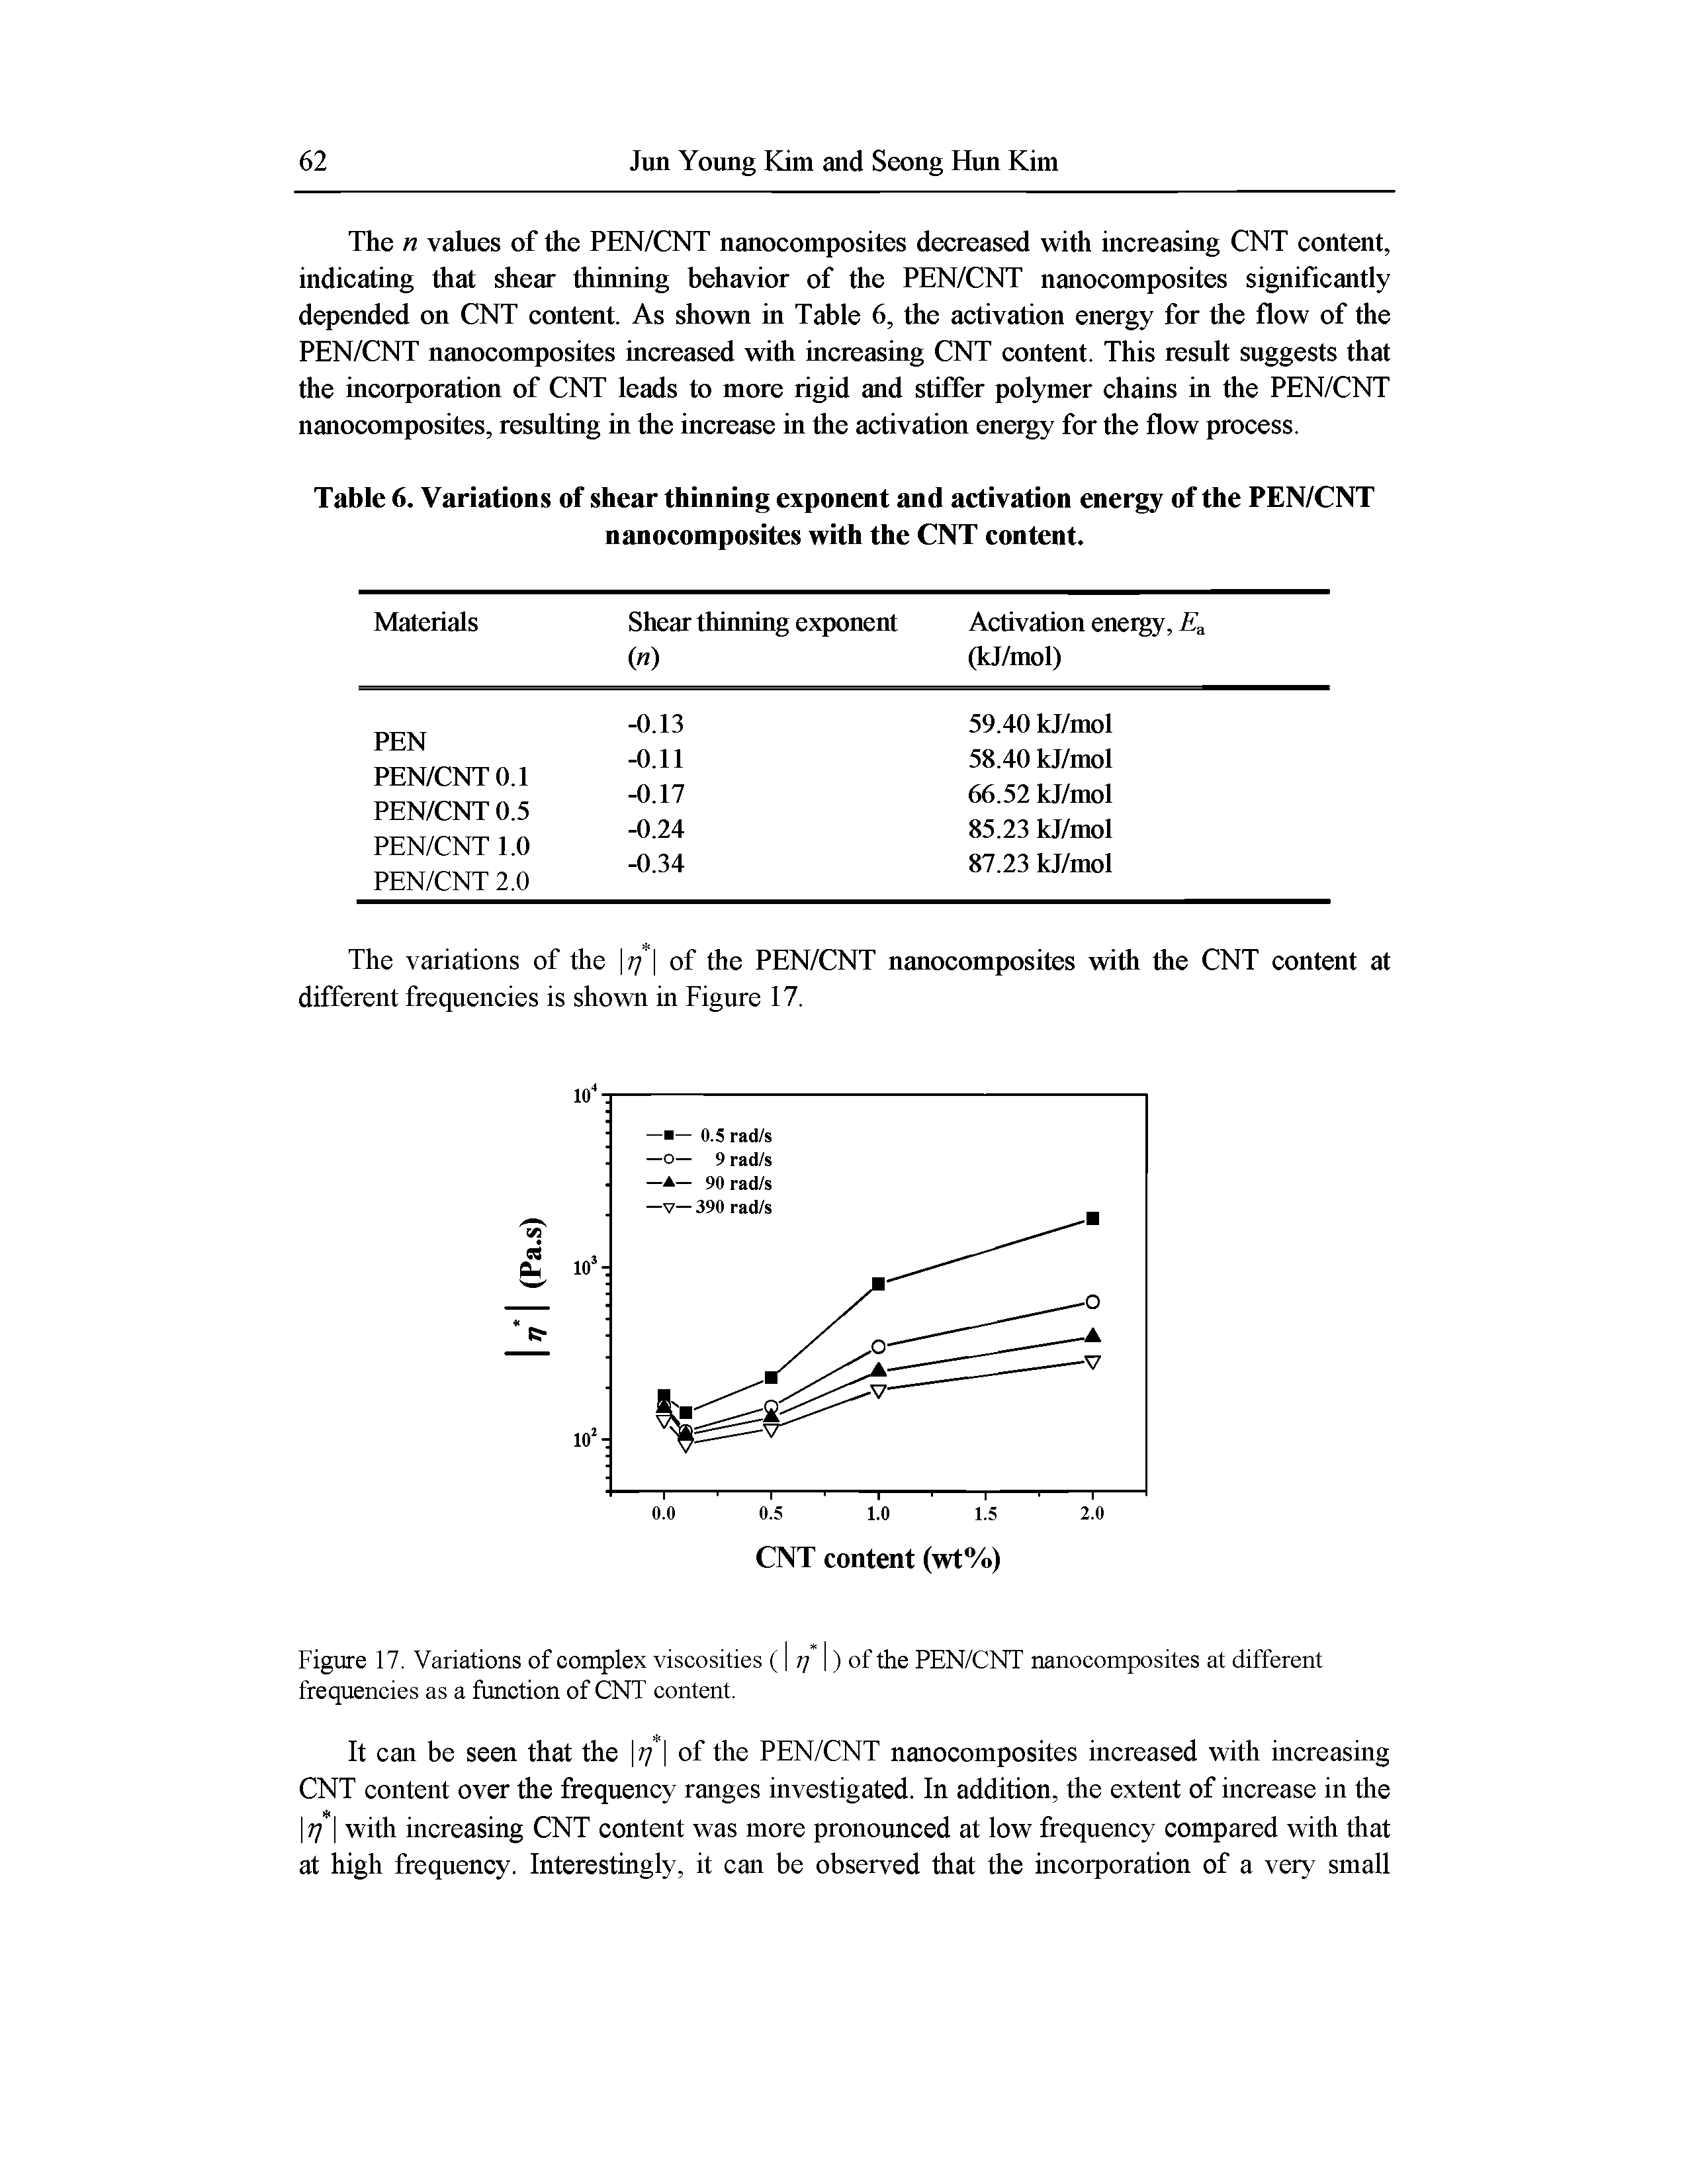 Table 6. Variations of shear thinning exponent and activation energy of the PEN/CNT nanocomposites with the CNT content.